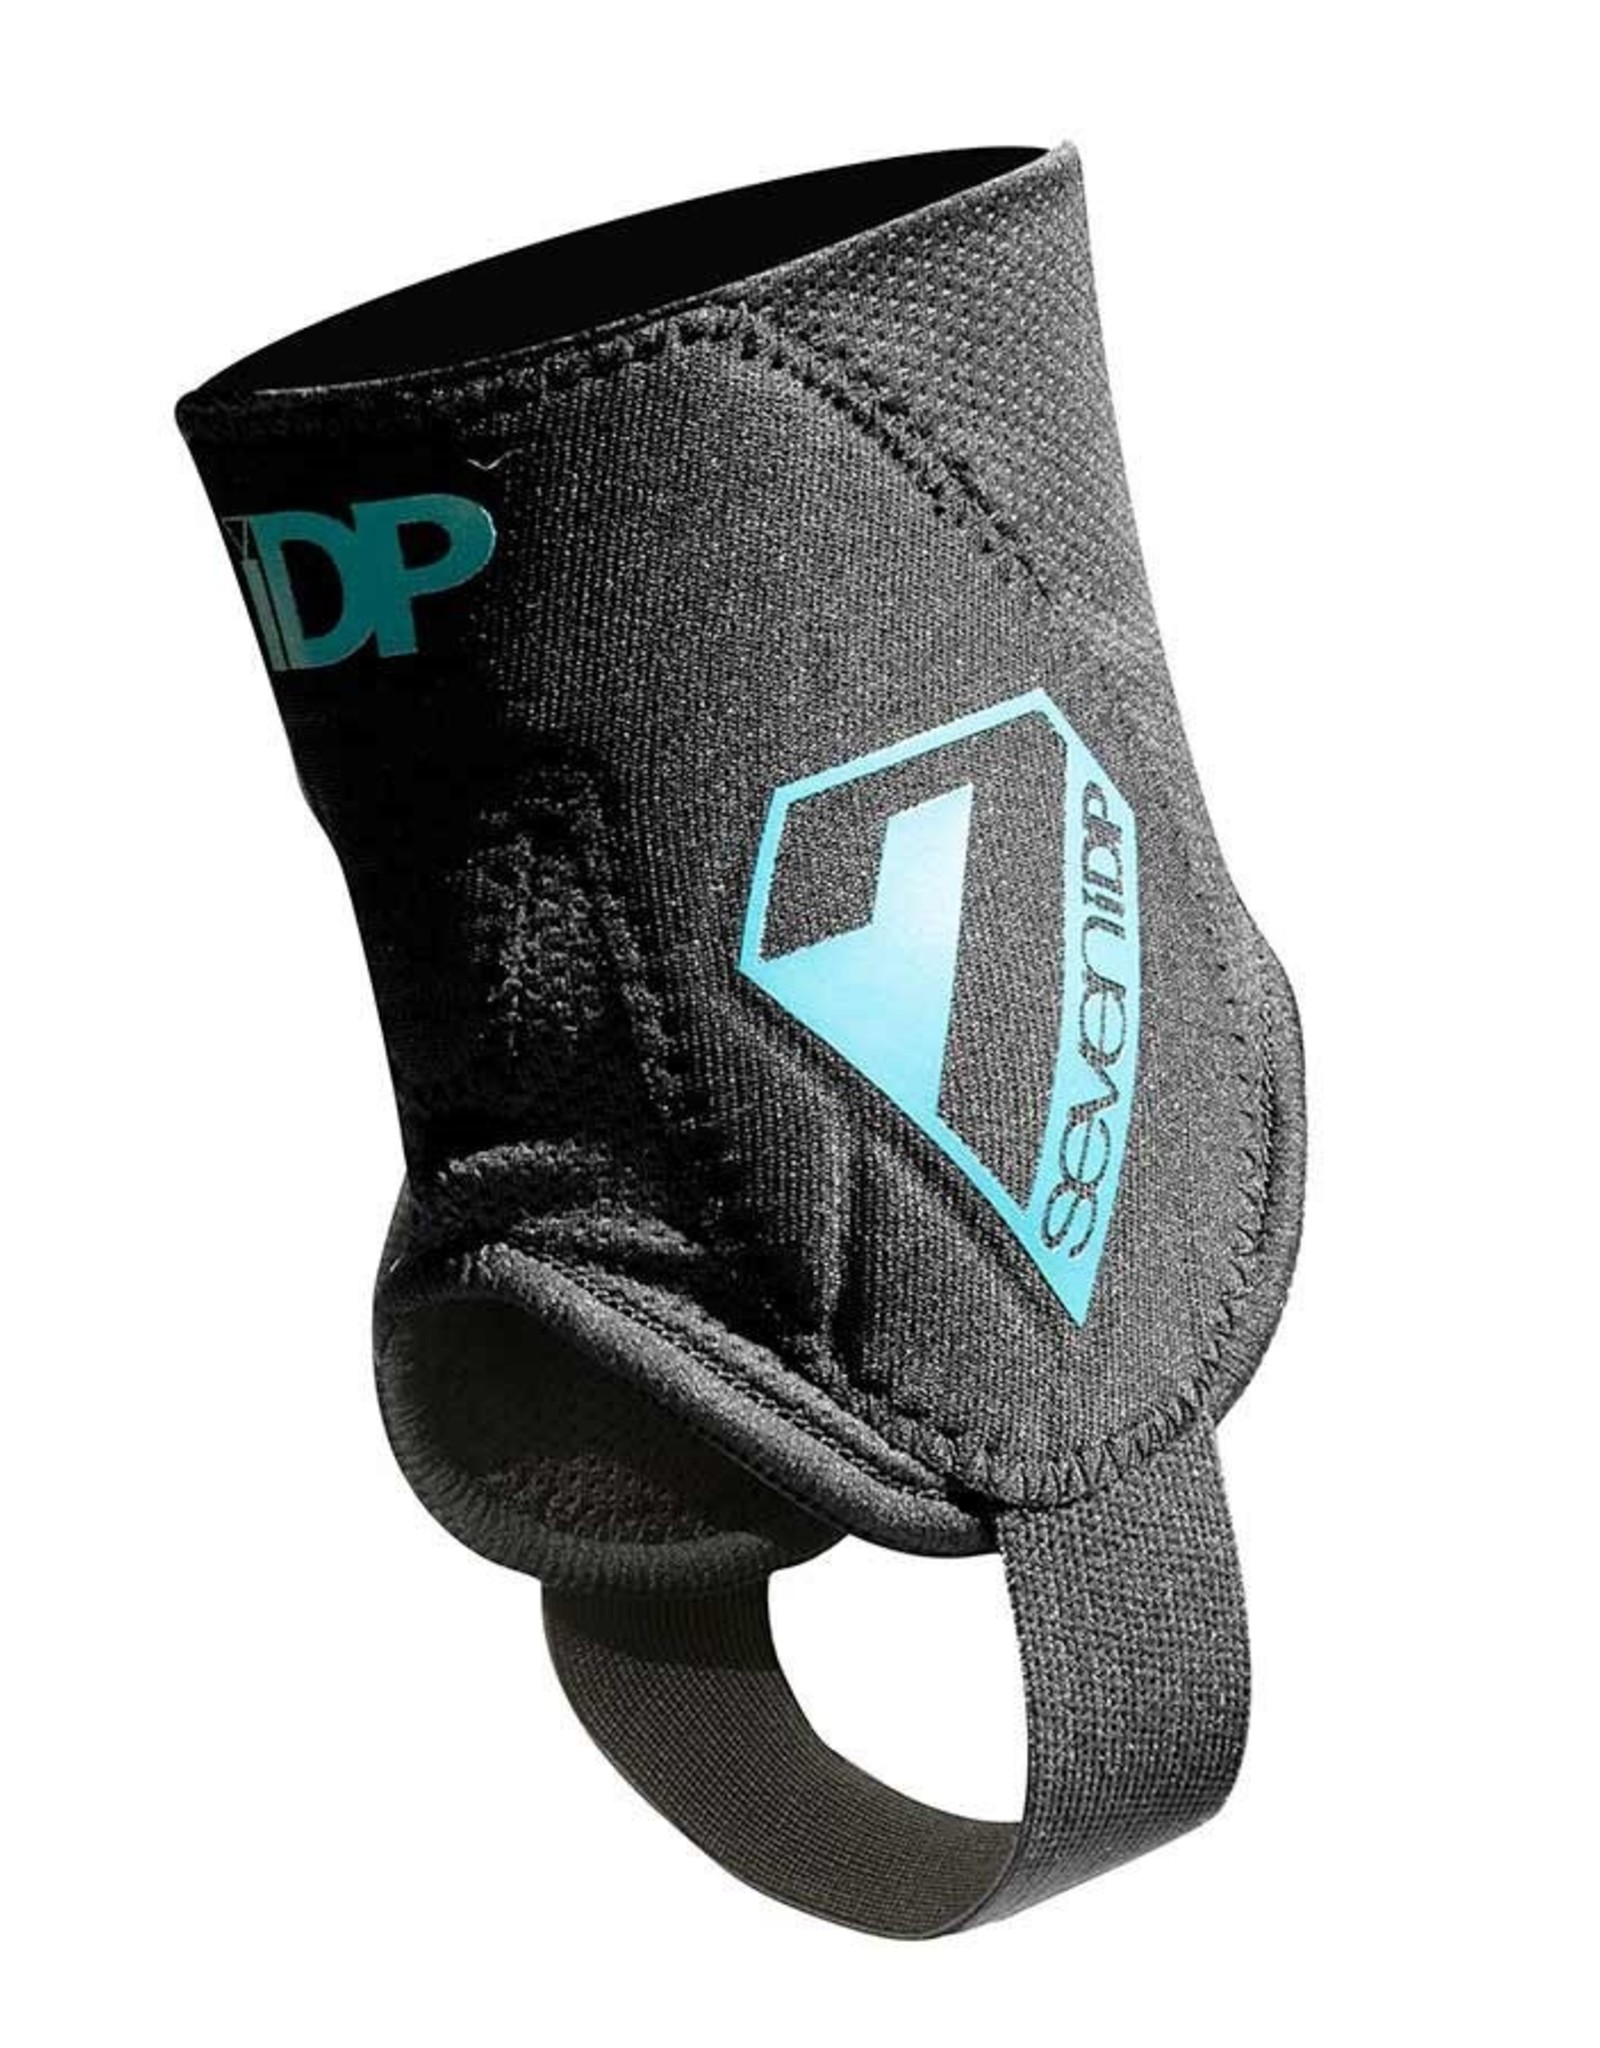 7iDP 7iDP, Control, Ankle Protector